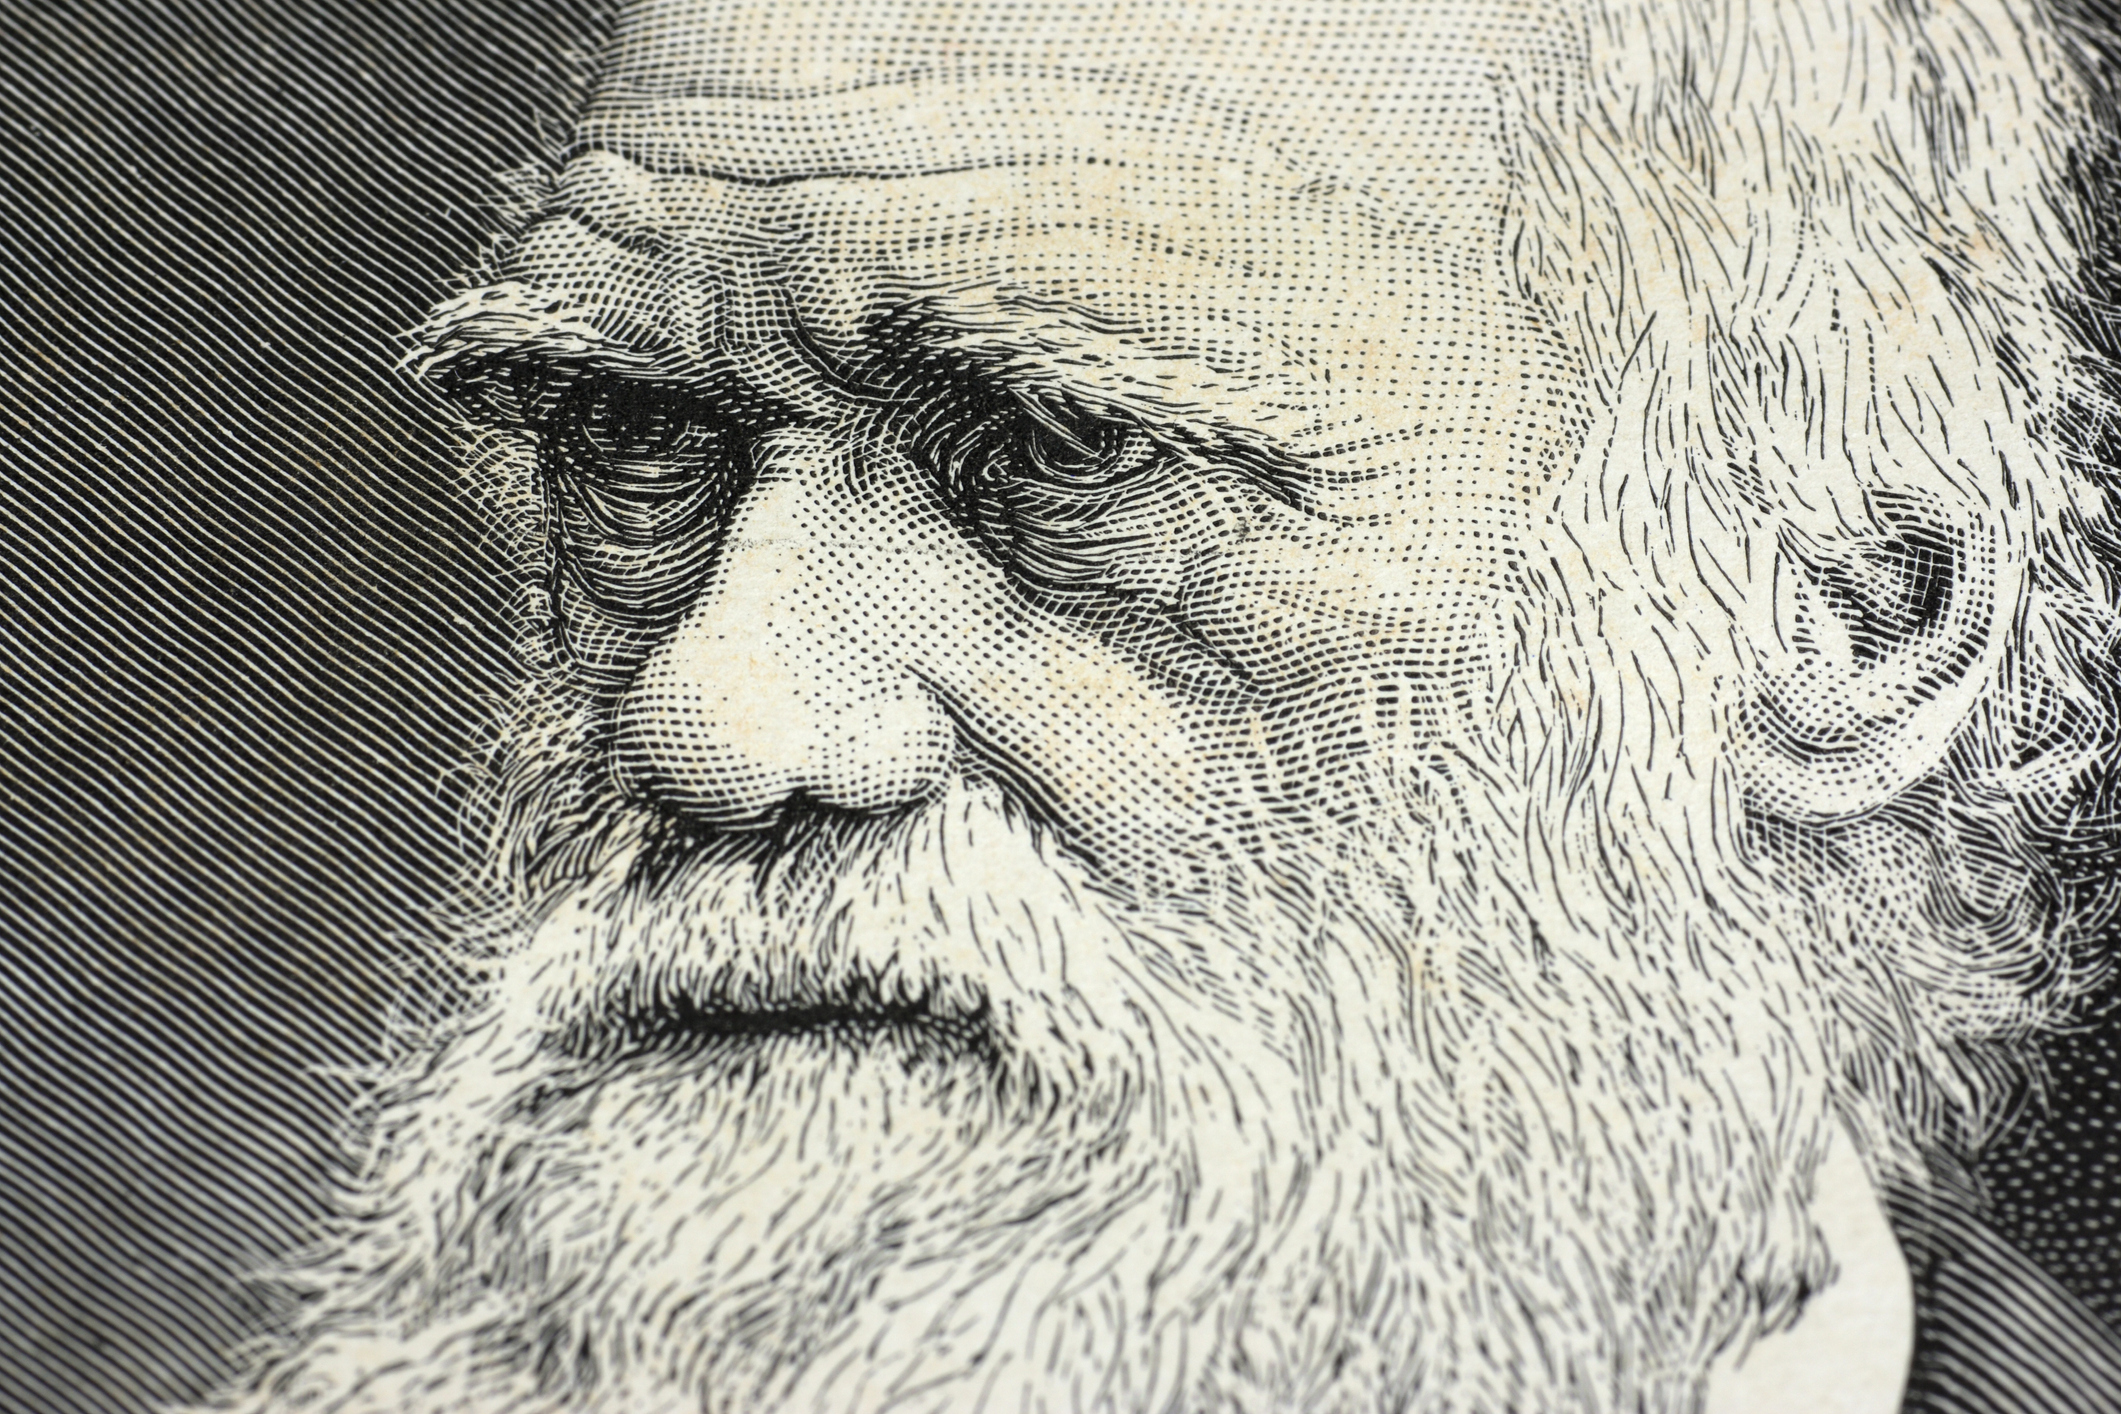 How Charles Darwin Spawned So Much Pseudo-Scientific Racism